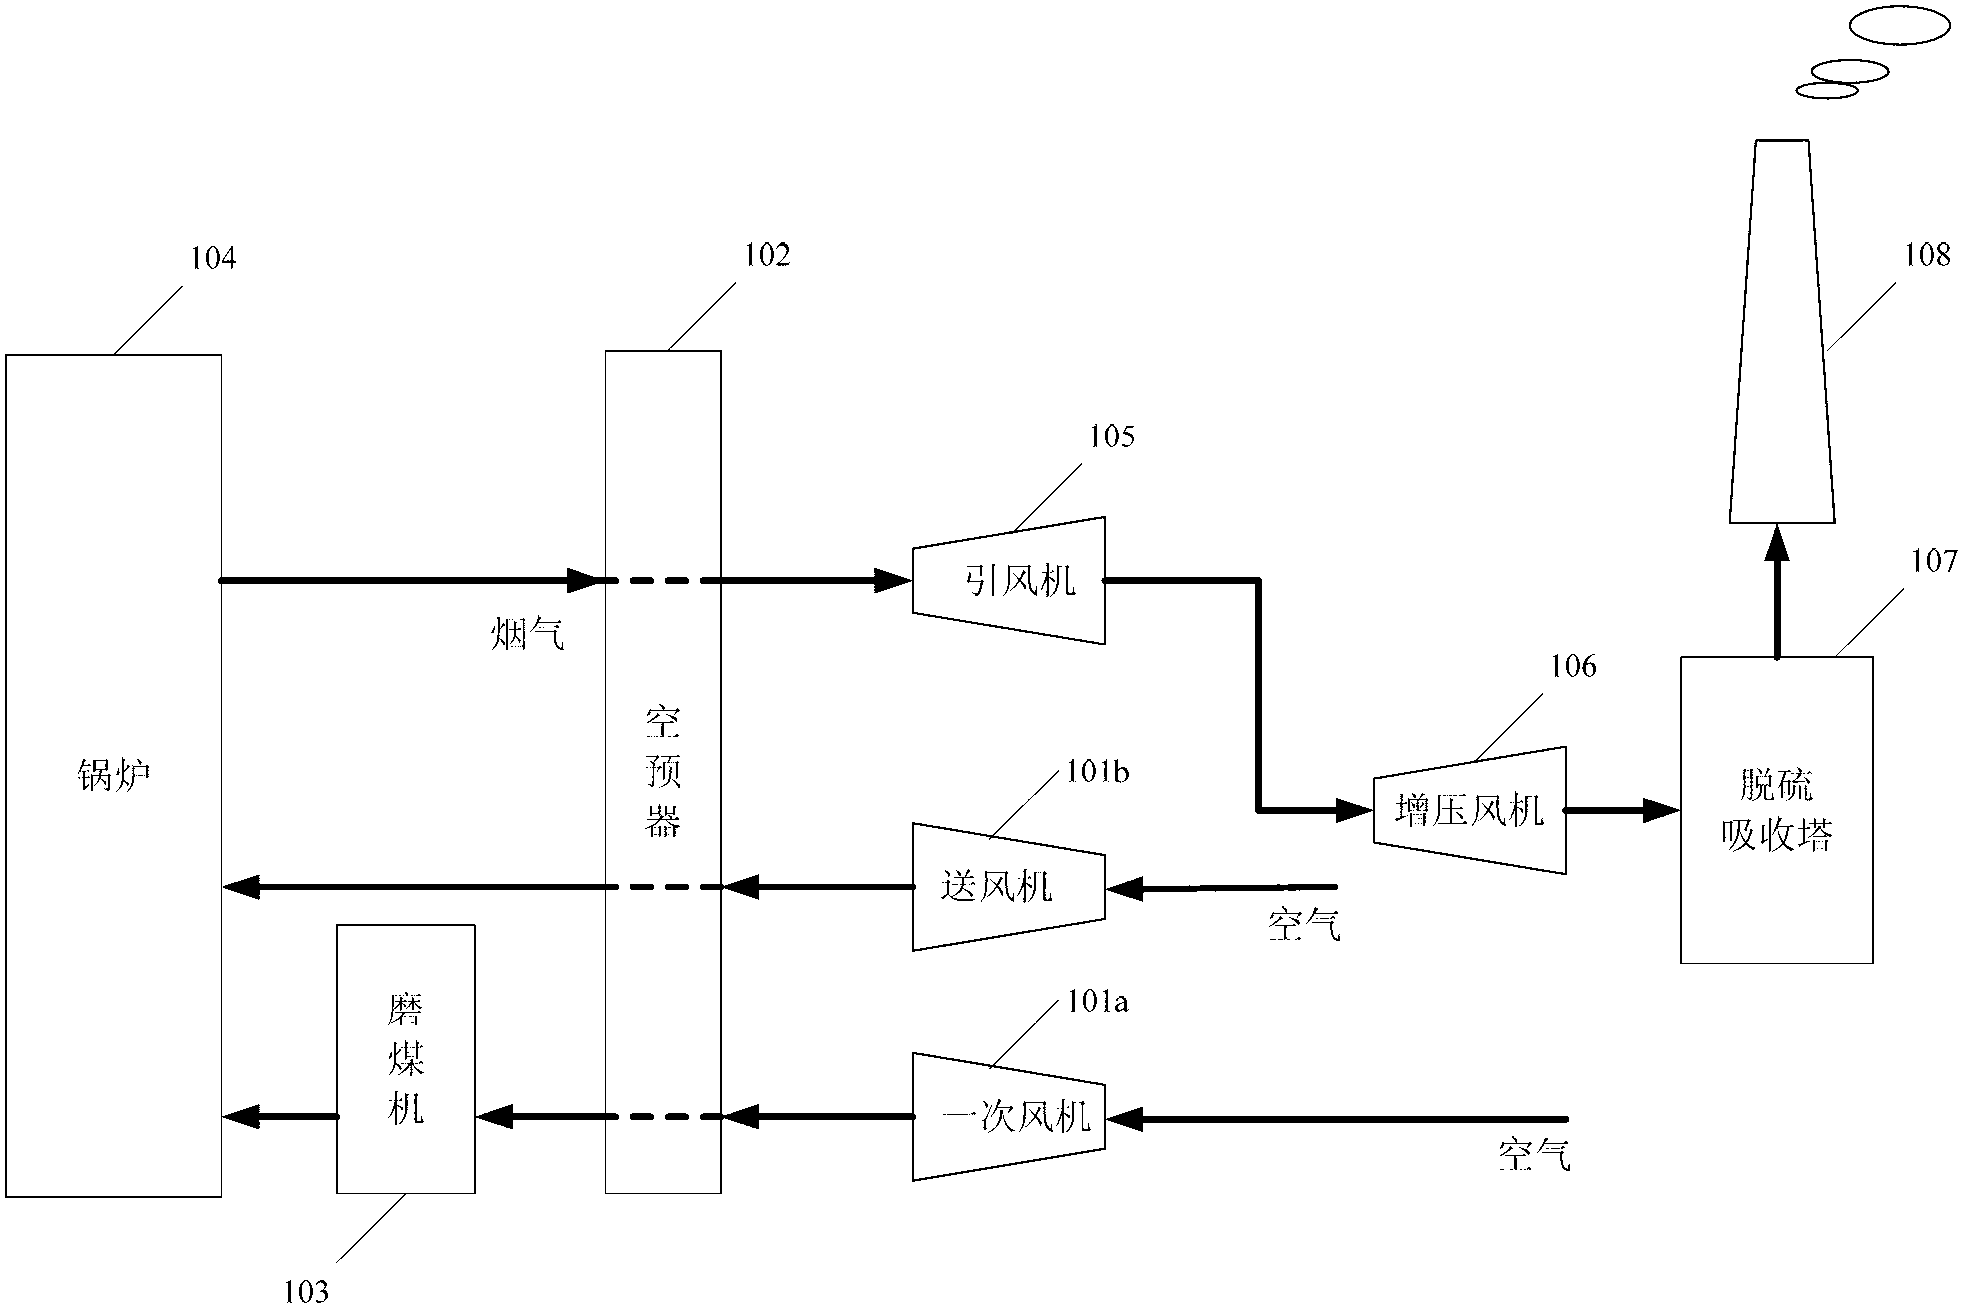 Control method for unbypassed booster fan of desulphurization system